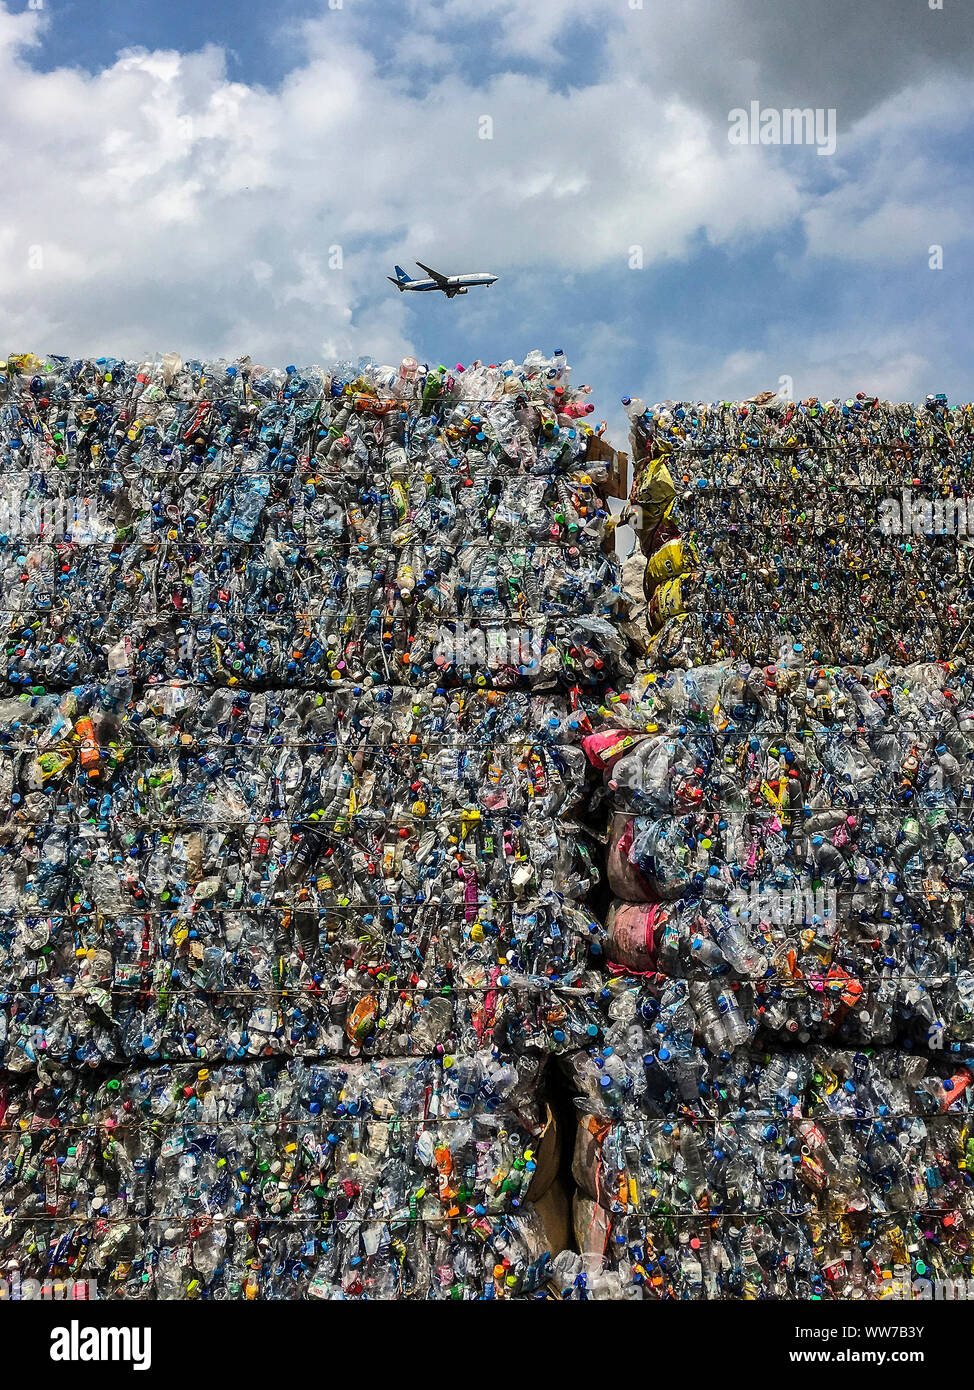 Recycling, crushed PET bottles, cloudy sky, airplane Stock Photo